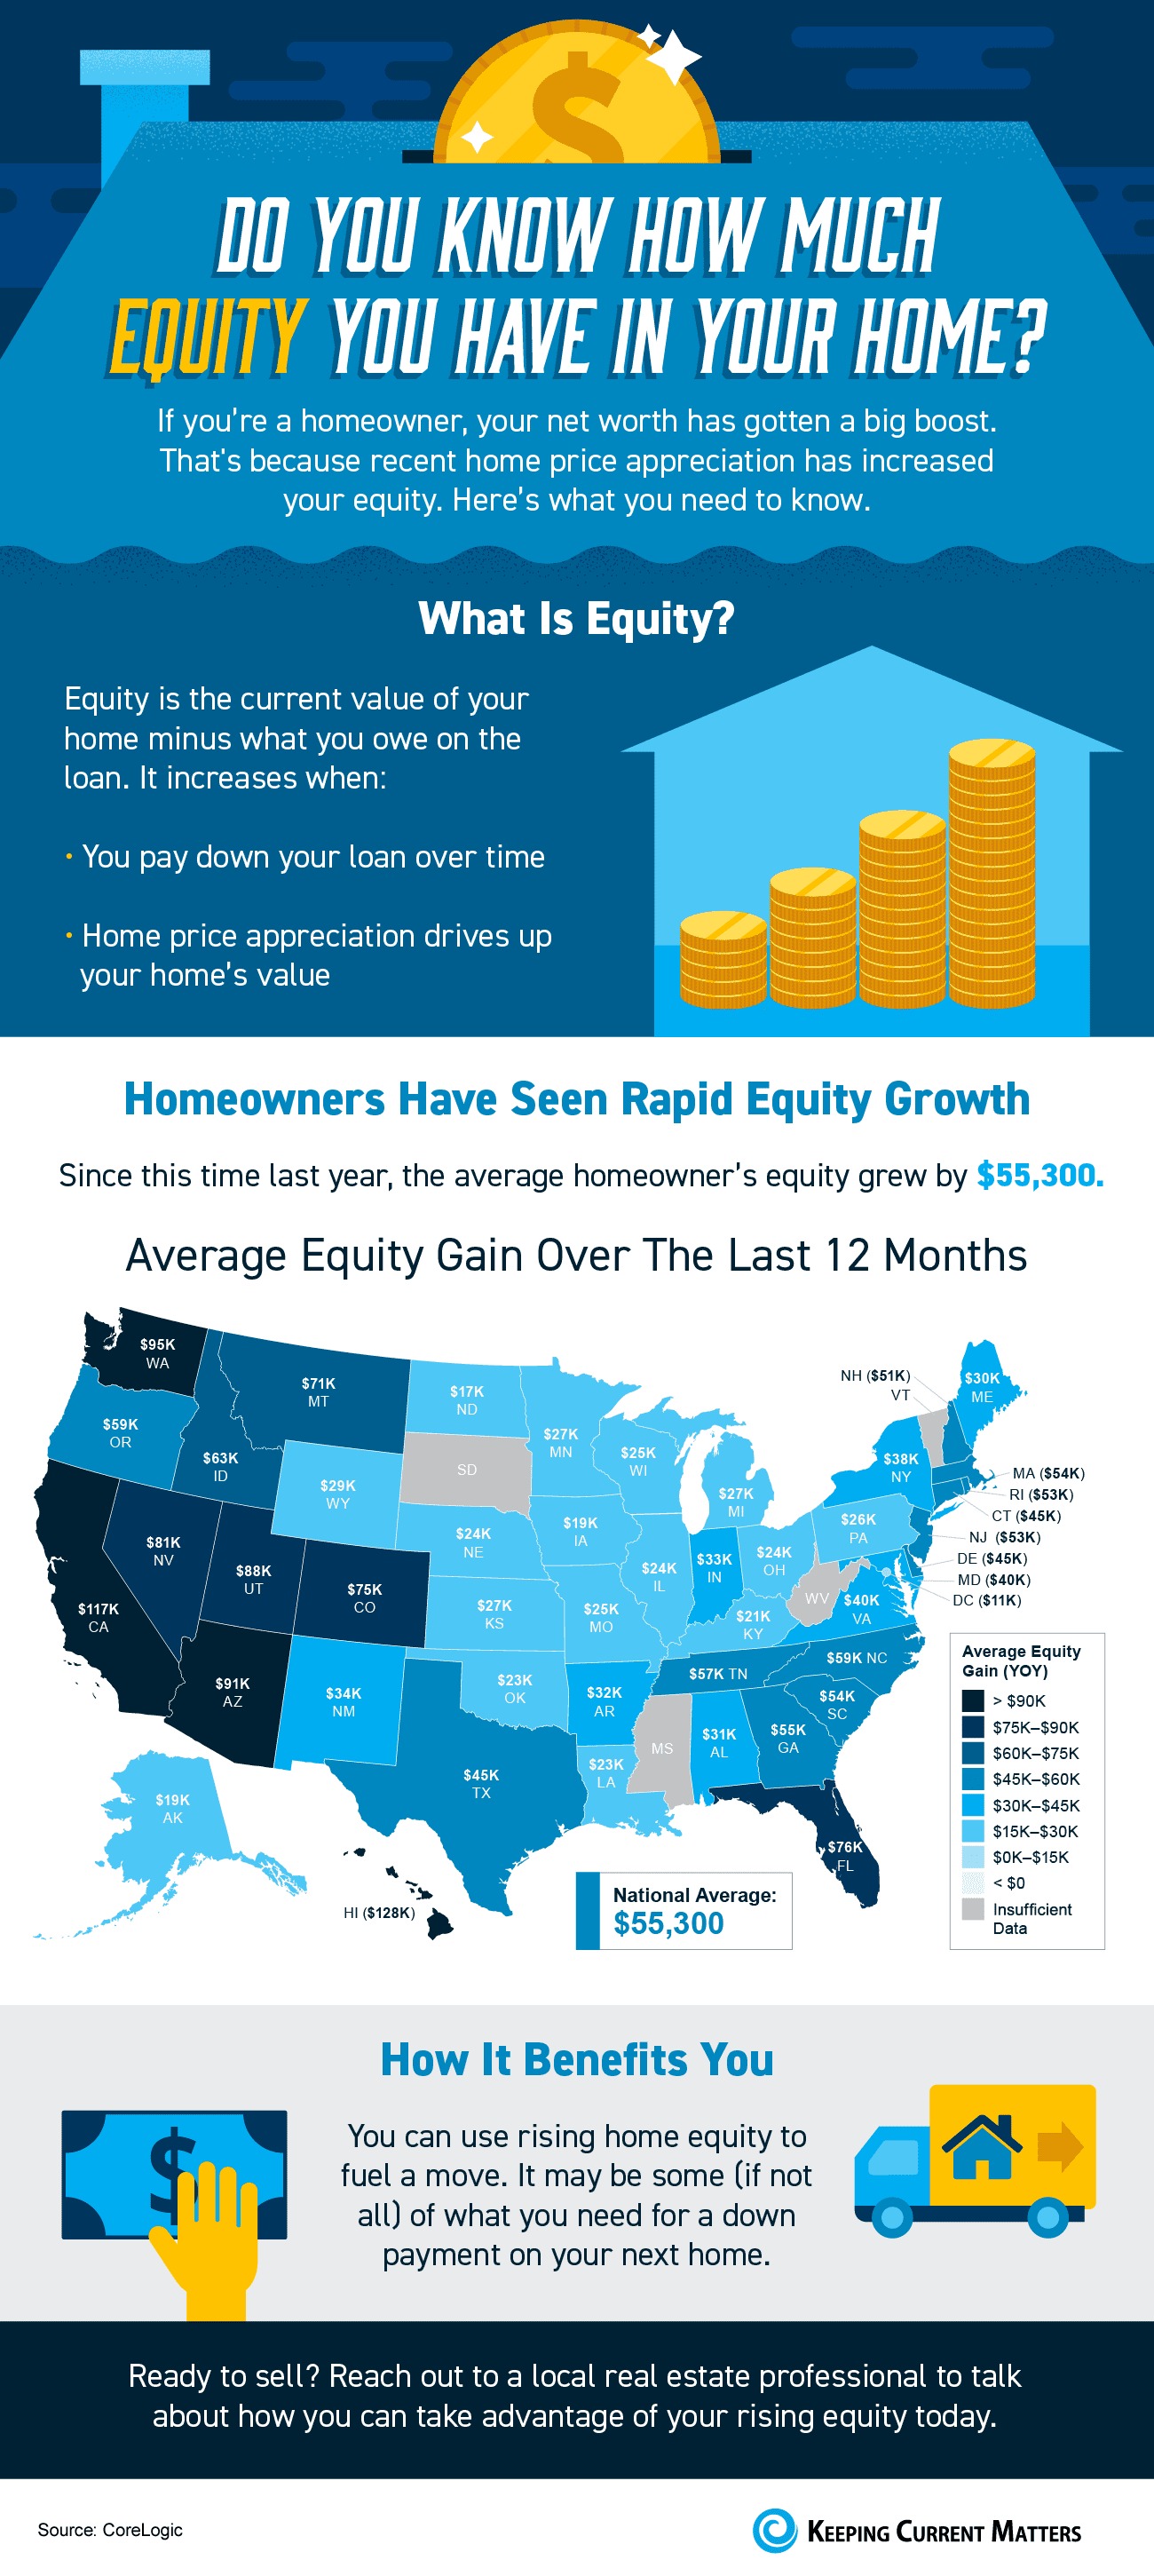 Do You Know How Much Equity You Have in Your Home? [INFOGRAPHIC] | Keeping Current Matters